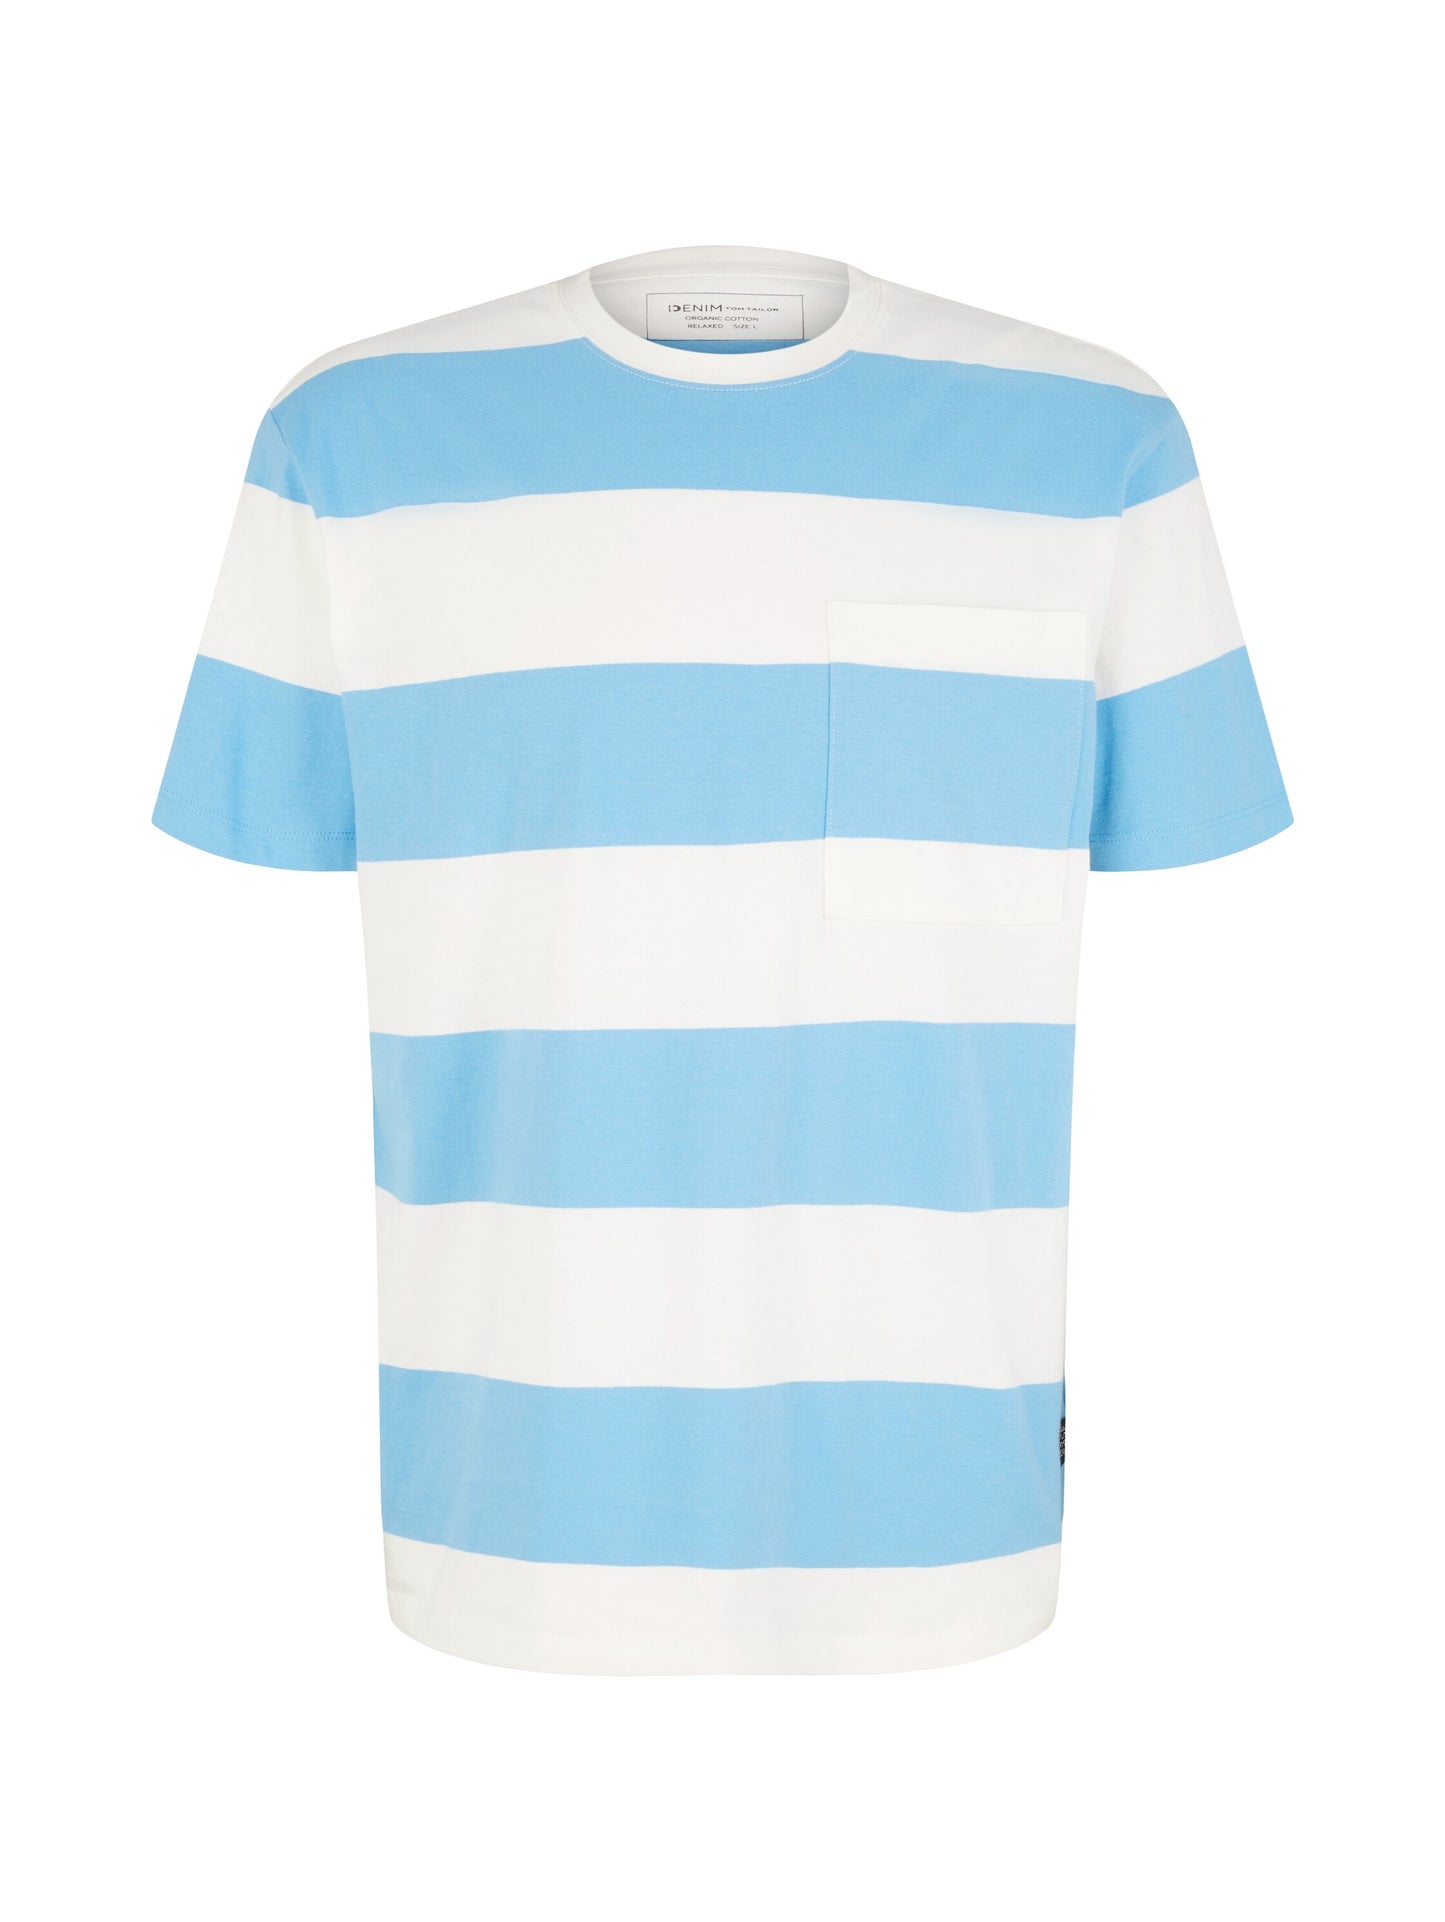 relaxed striped t-shirt